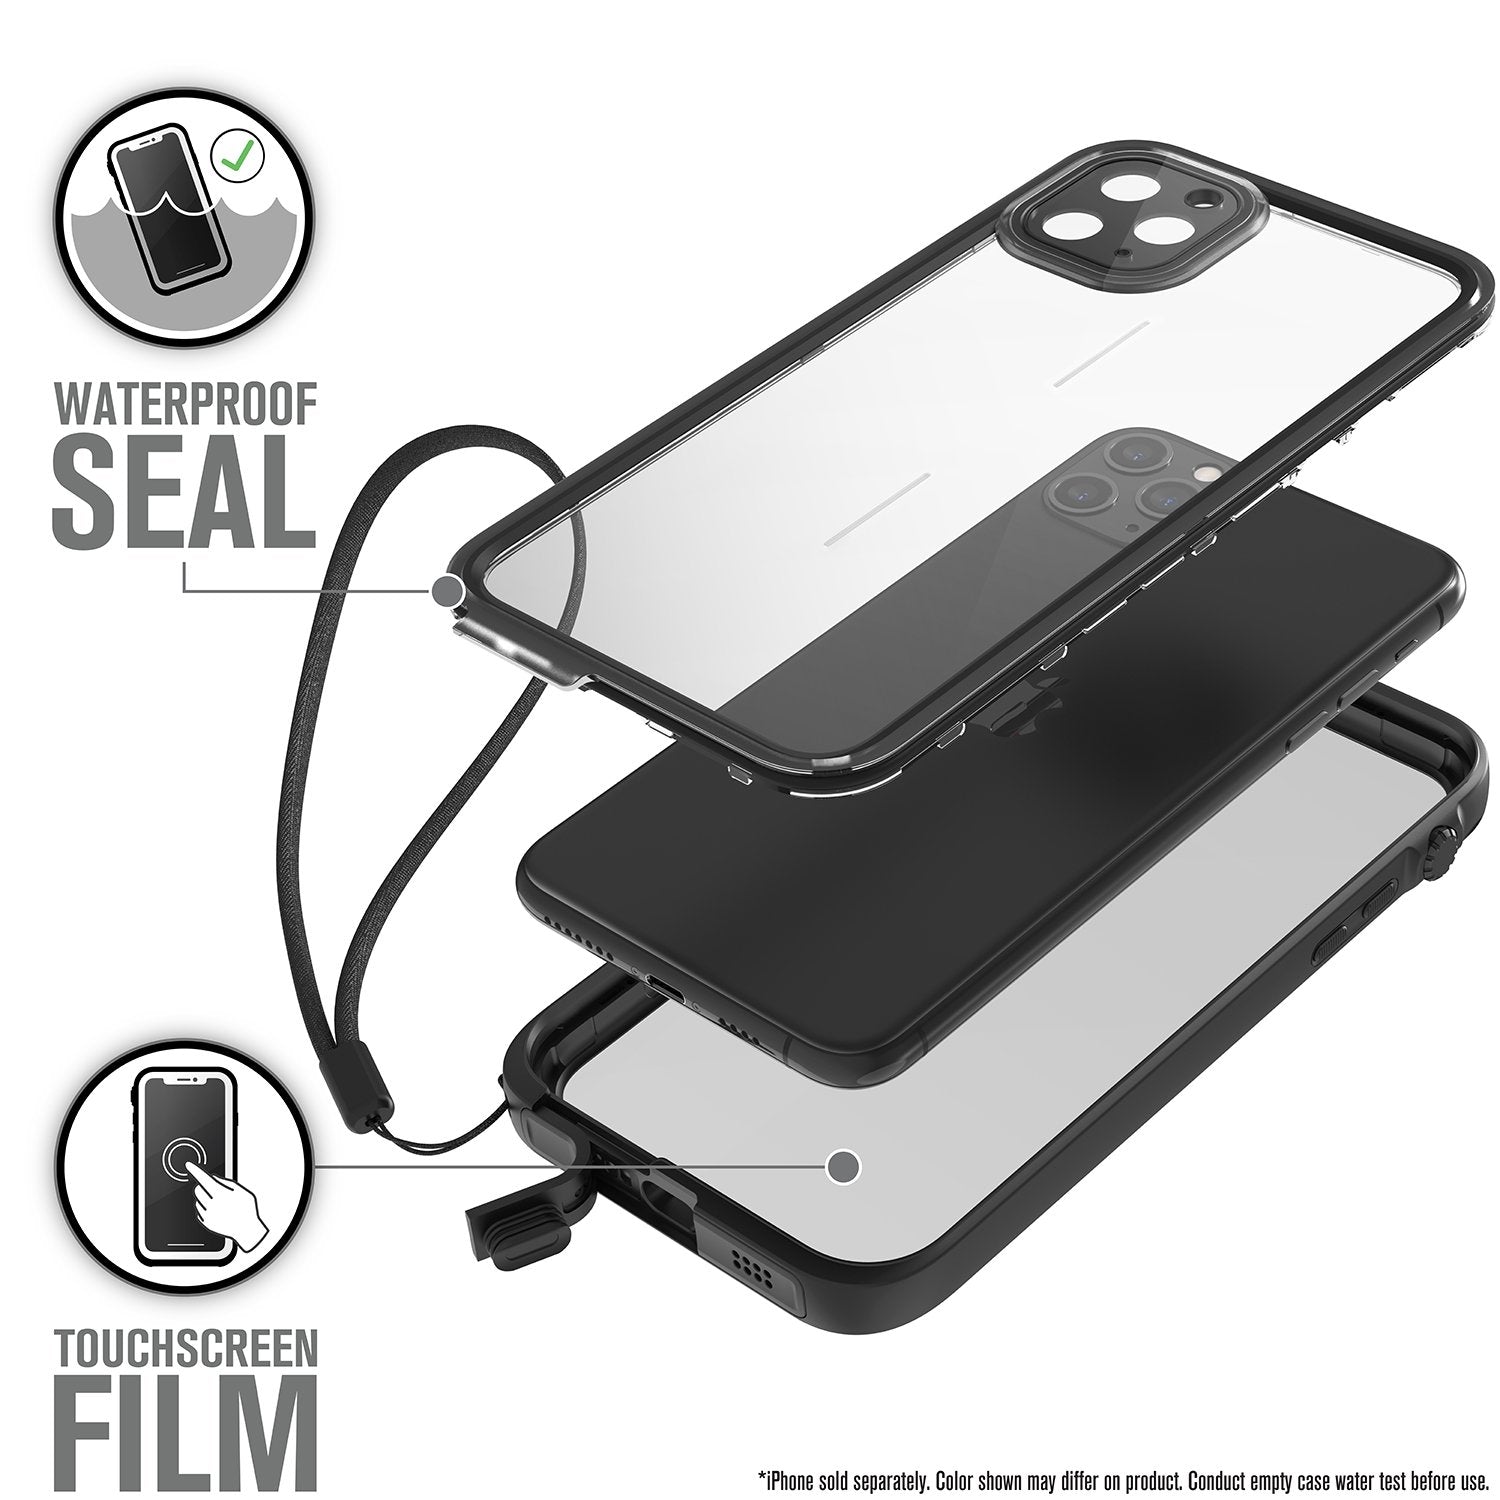 Catalyst iphone 11 pro max waterproof case showing the case screen film in stealth black colorway